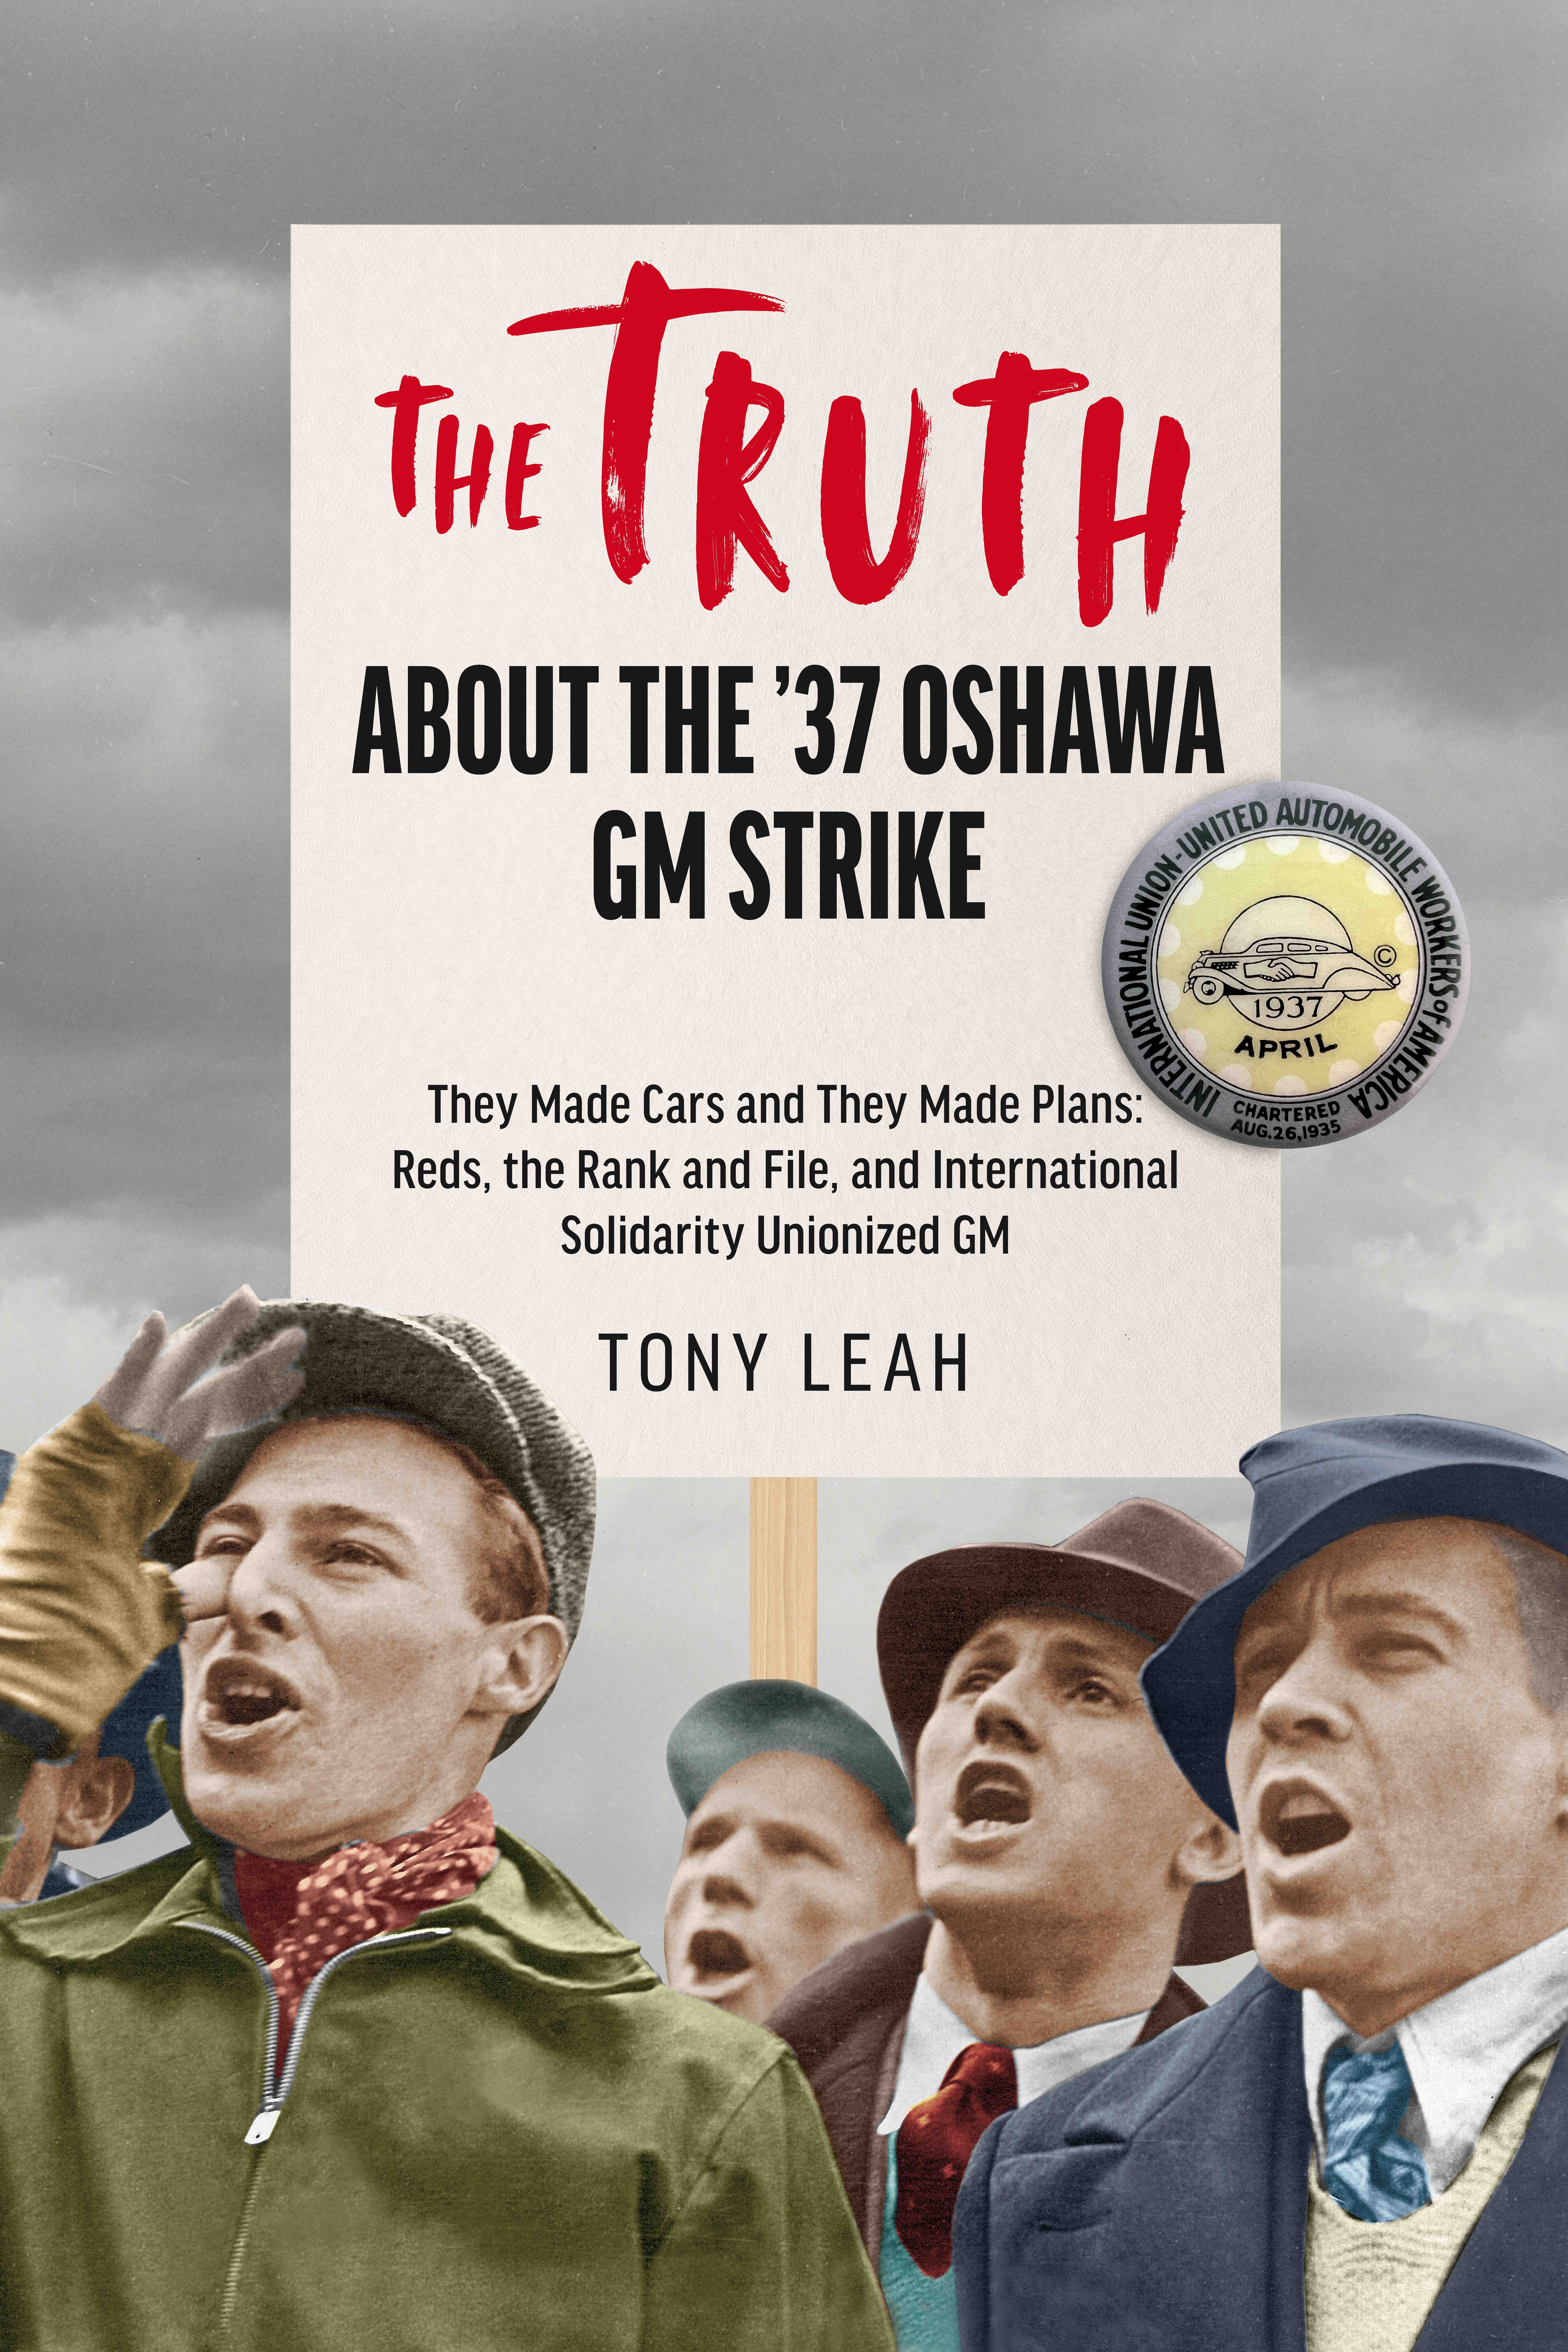 THE TRUTH ABOUT THE ’37 OSHAWA GM STRIKE